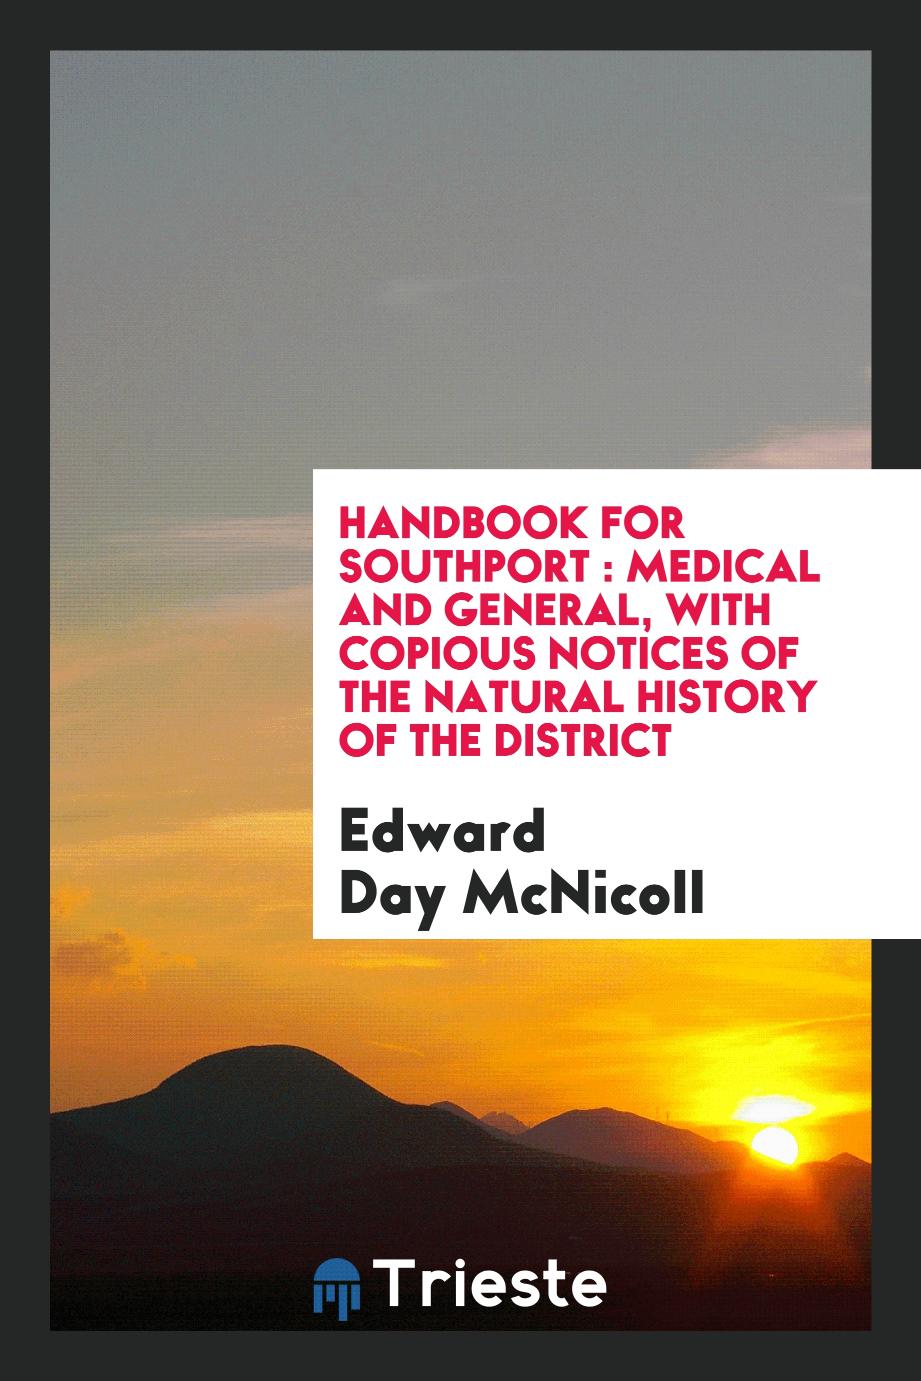 Handbook for Southport : Medical and General, with Copious Notices of the Natural History of the District